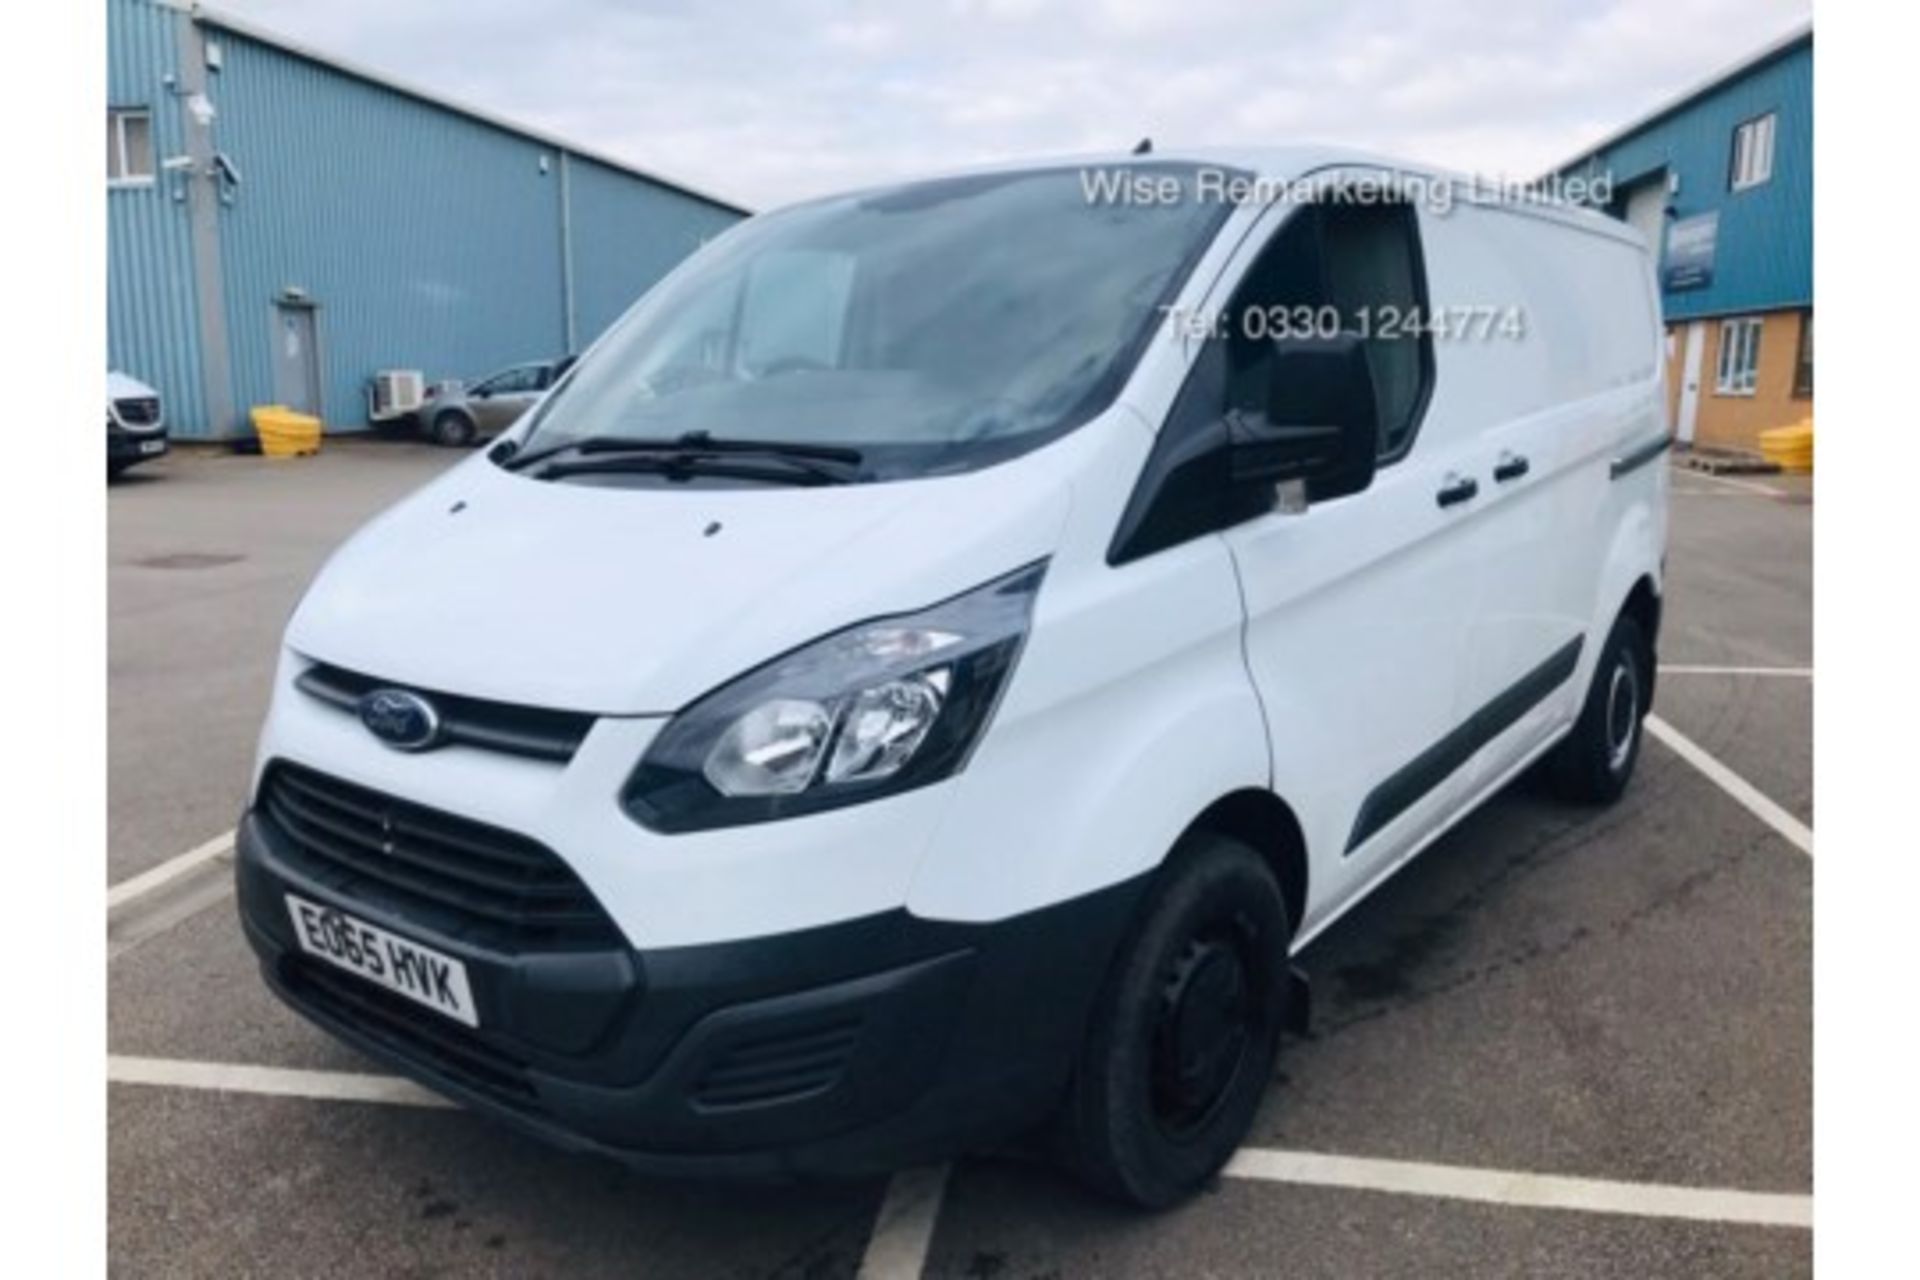 Ford Transit Custom 270 2.2 TDCI Eco-Tech - 2016 Model - 1 Keeper From New